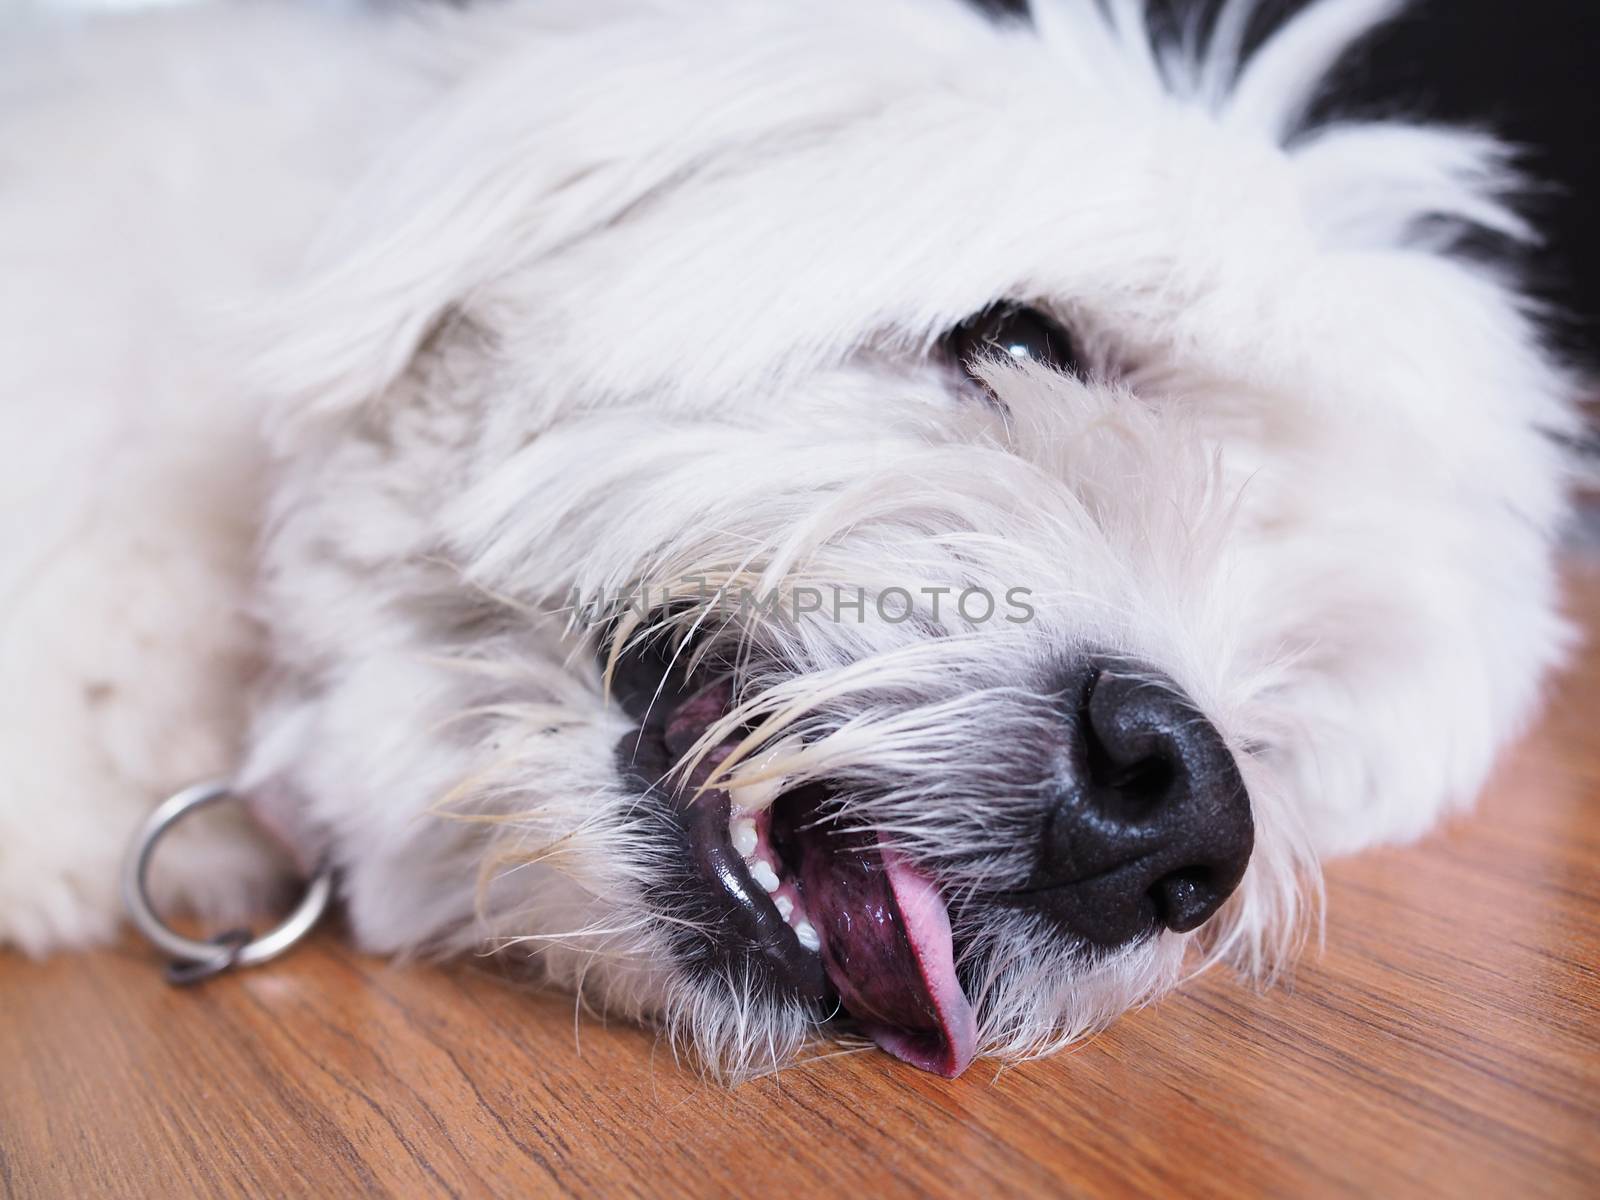 old white dog lying on a wooden floor Stick the tongue out by kittima05